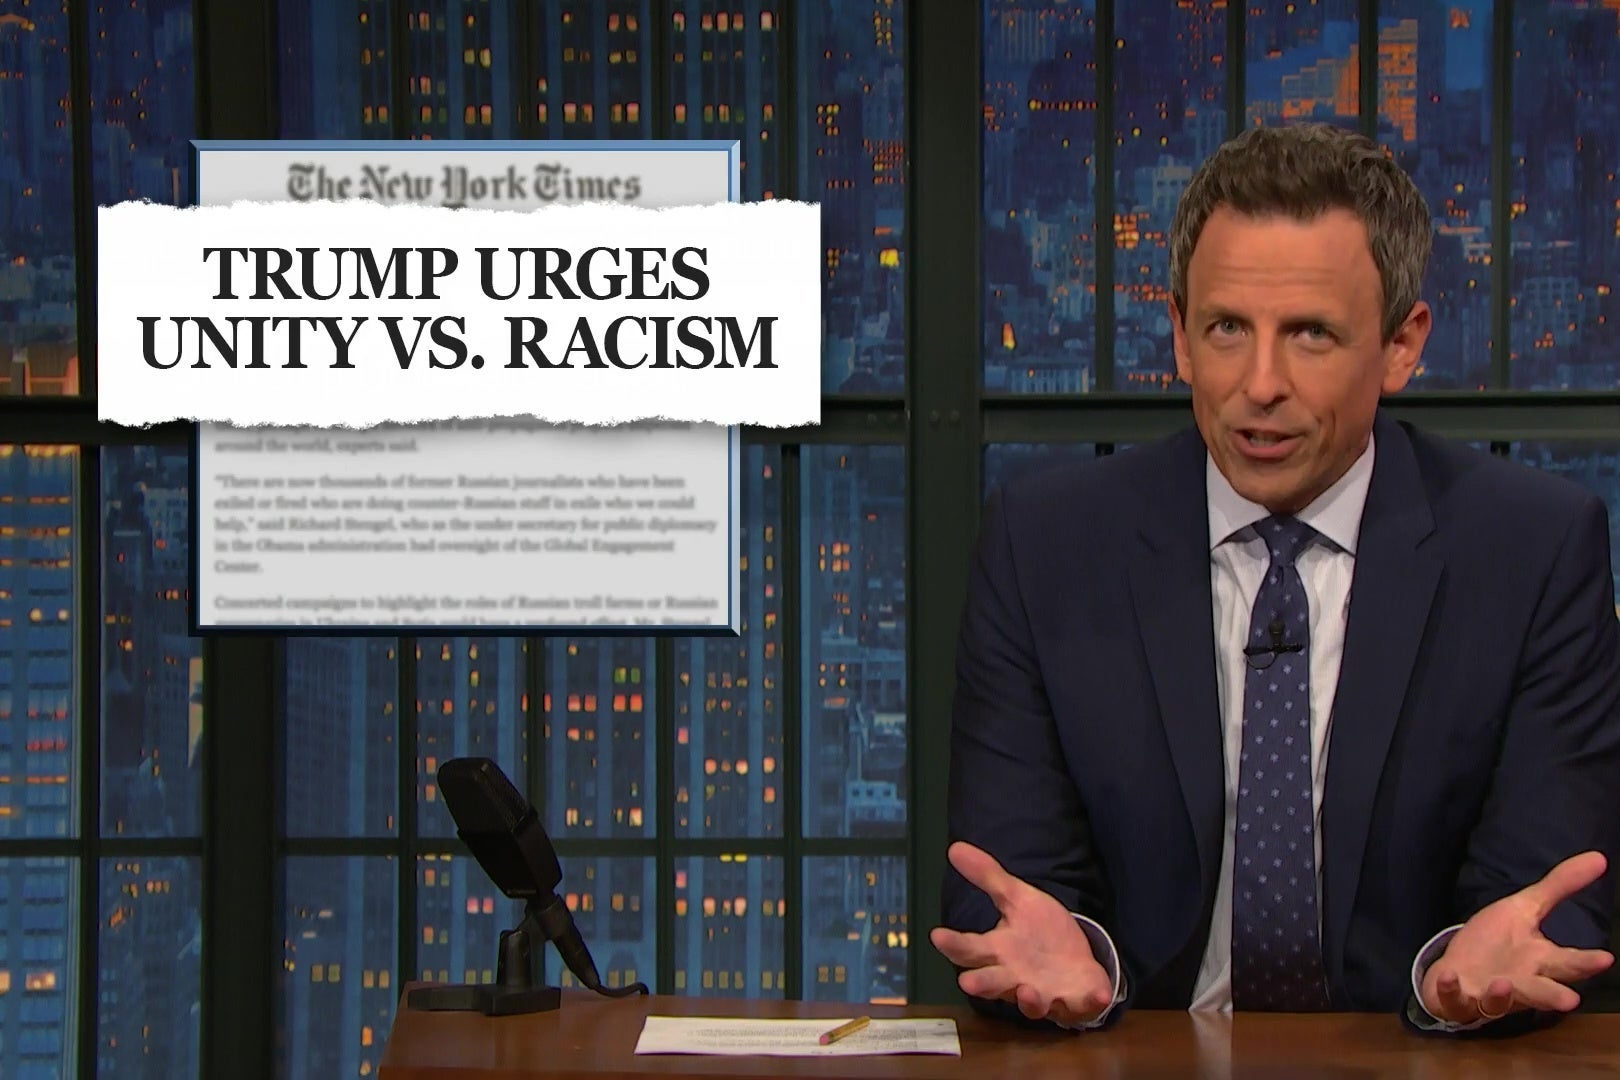 Seth Meyers gestures in disbelief in front of a New York Times headline reading "TRUMP URGES UNITY VS. RACISM."